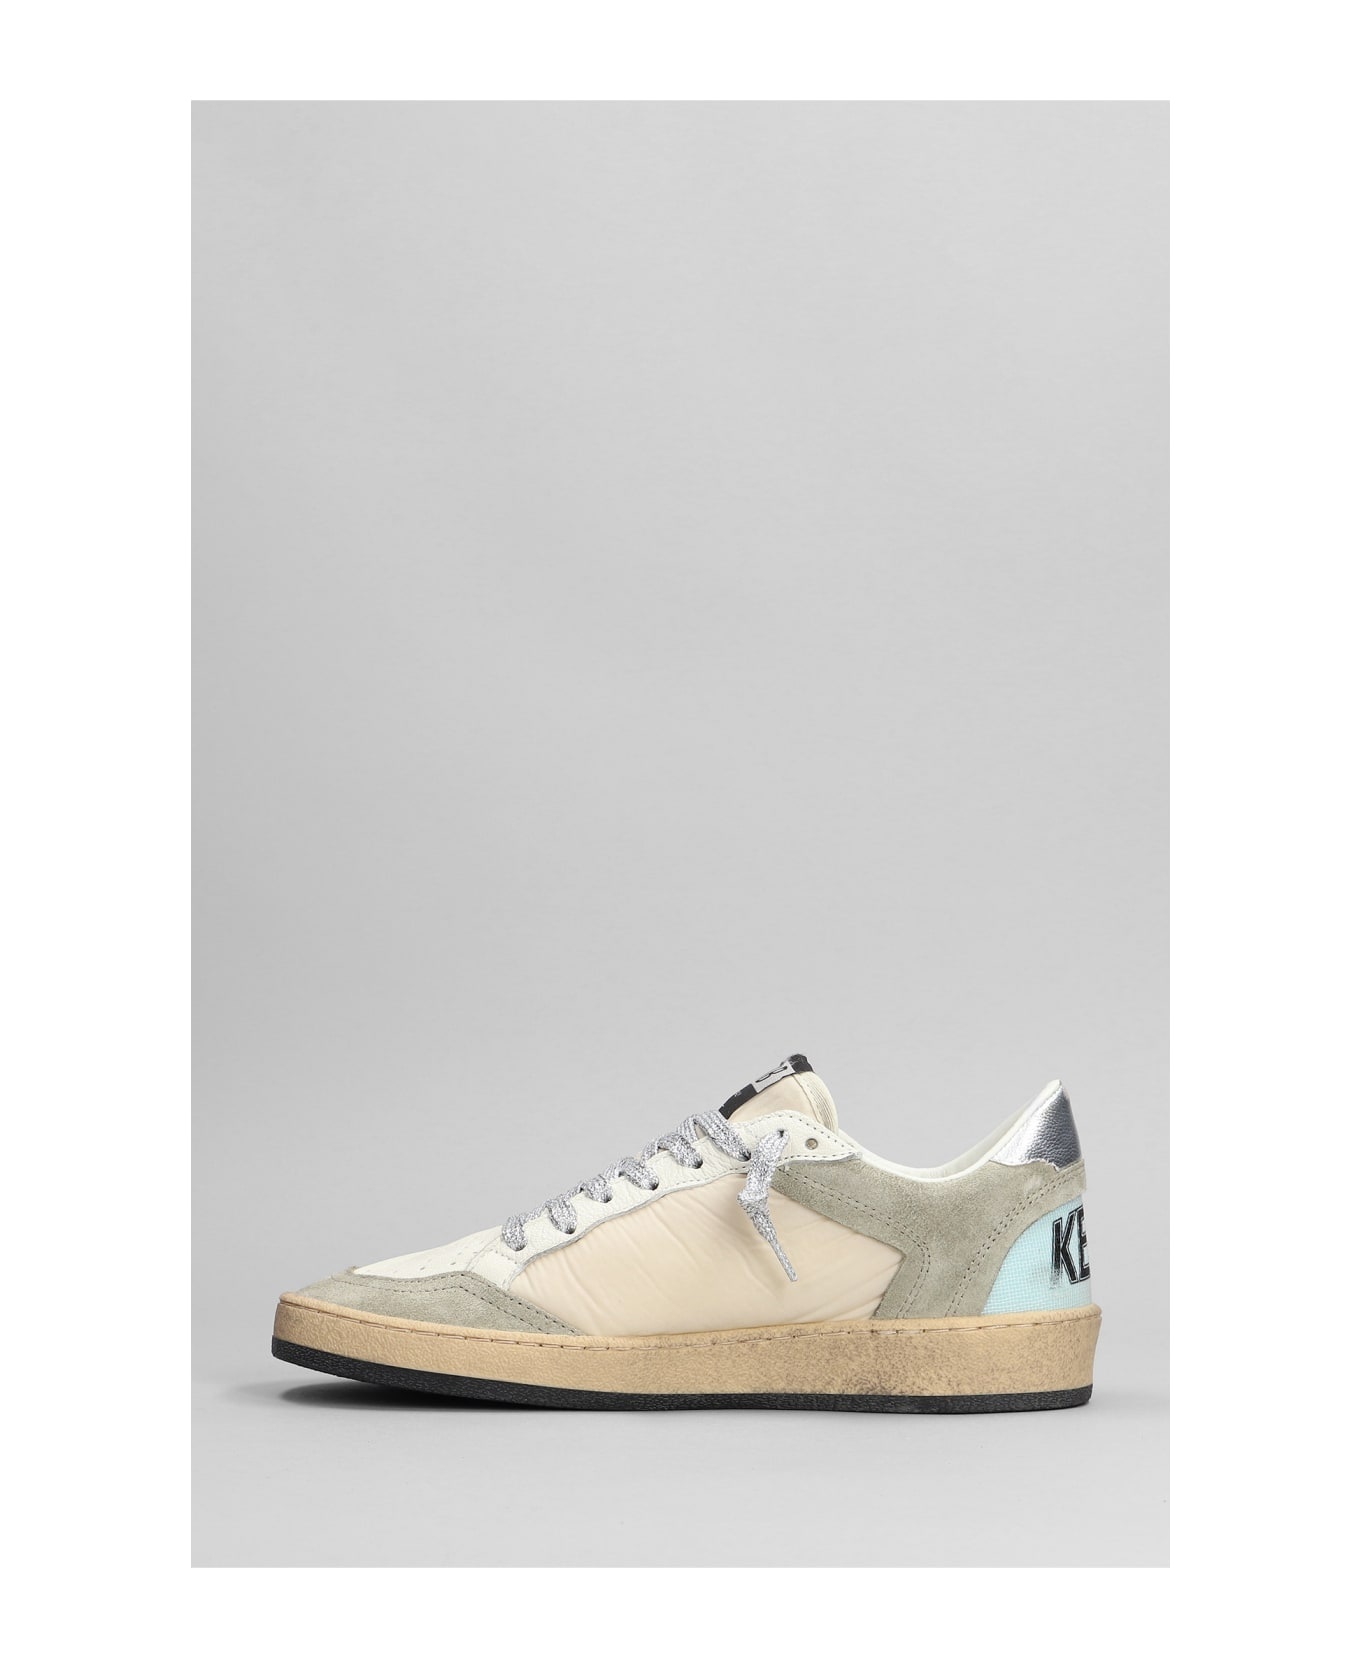 Ball Star Sneakers In Beige Leather And Fabric - 3